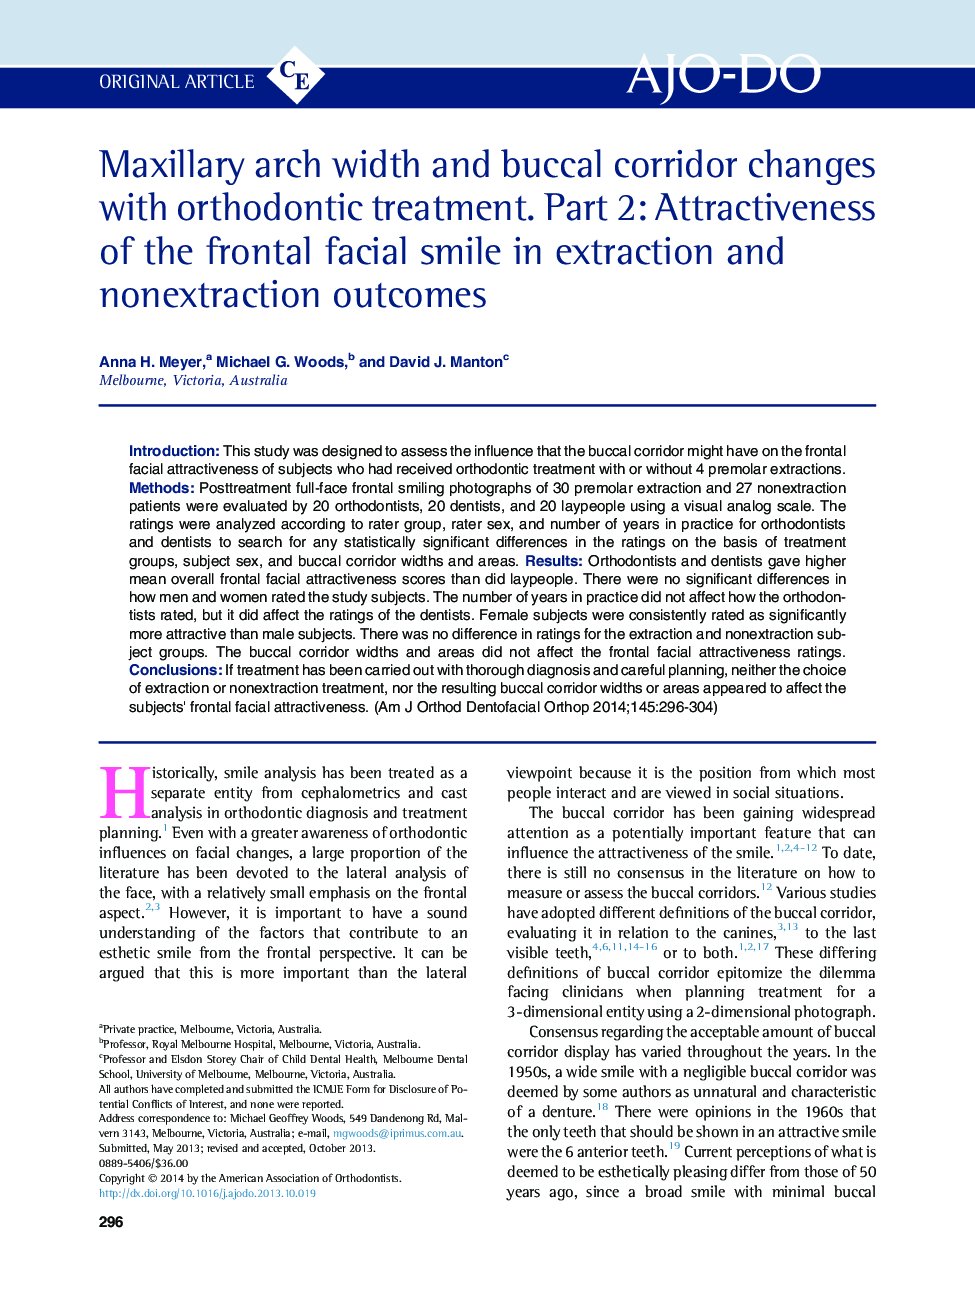 Maxillary arch width and buccal corridor changes with orthodontic treatment. Part 2: Attractiveness of the frontal facial smile in extraction and nonextraction outcomes 